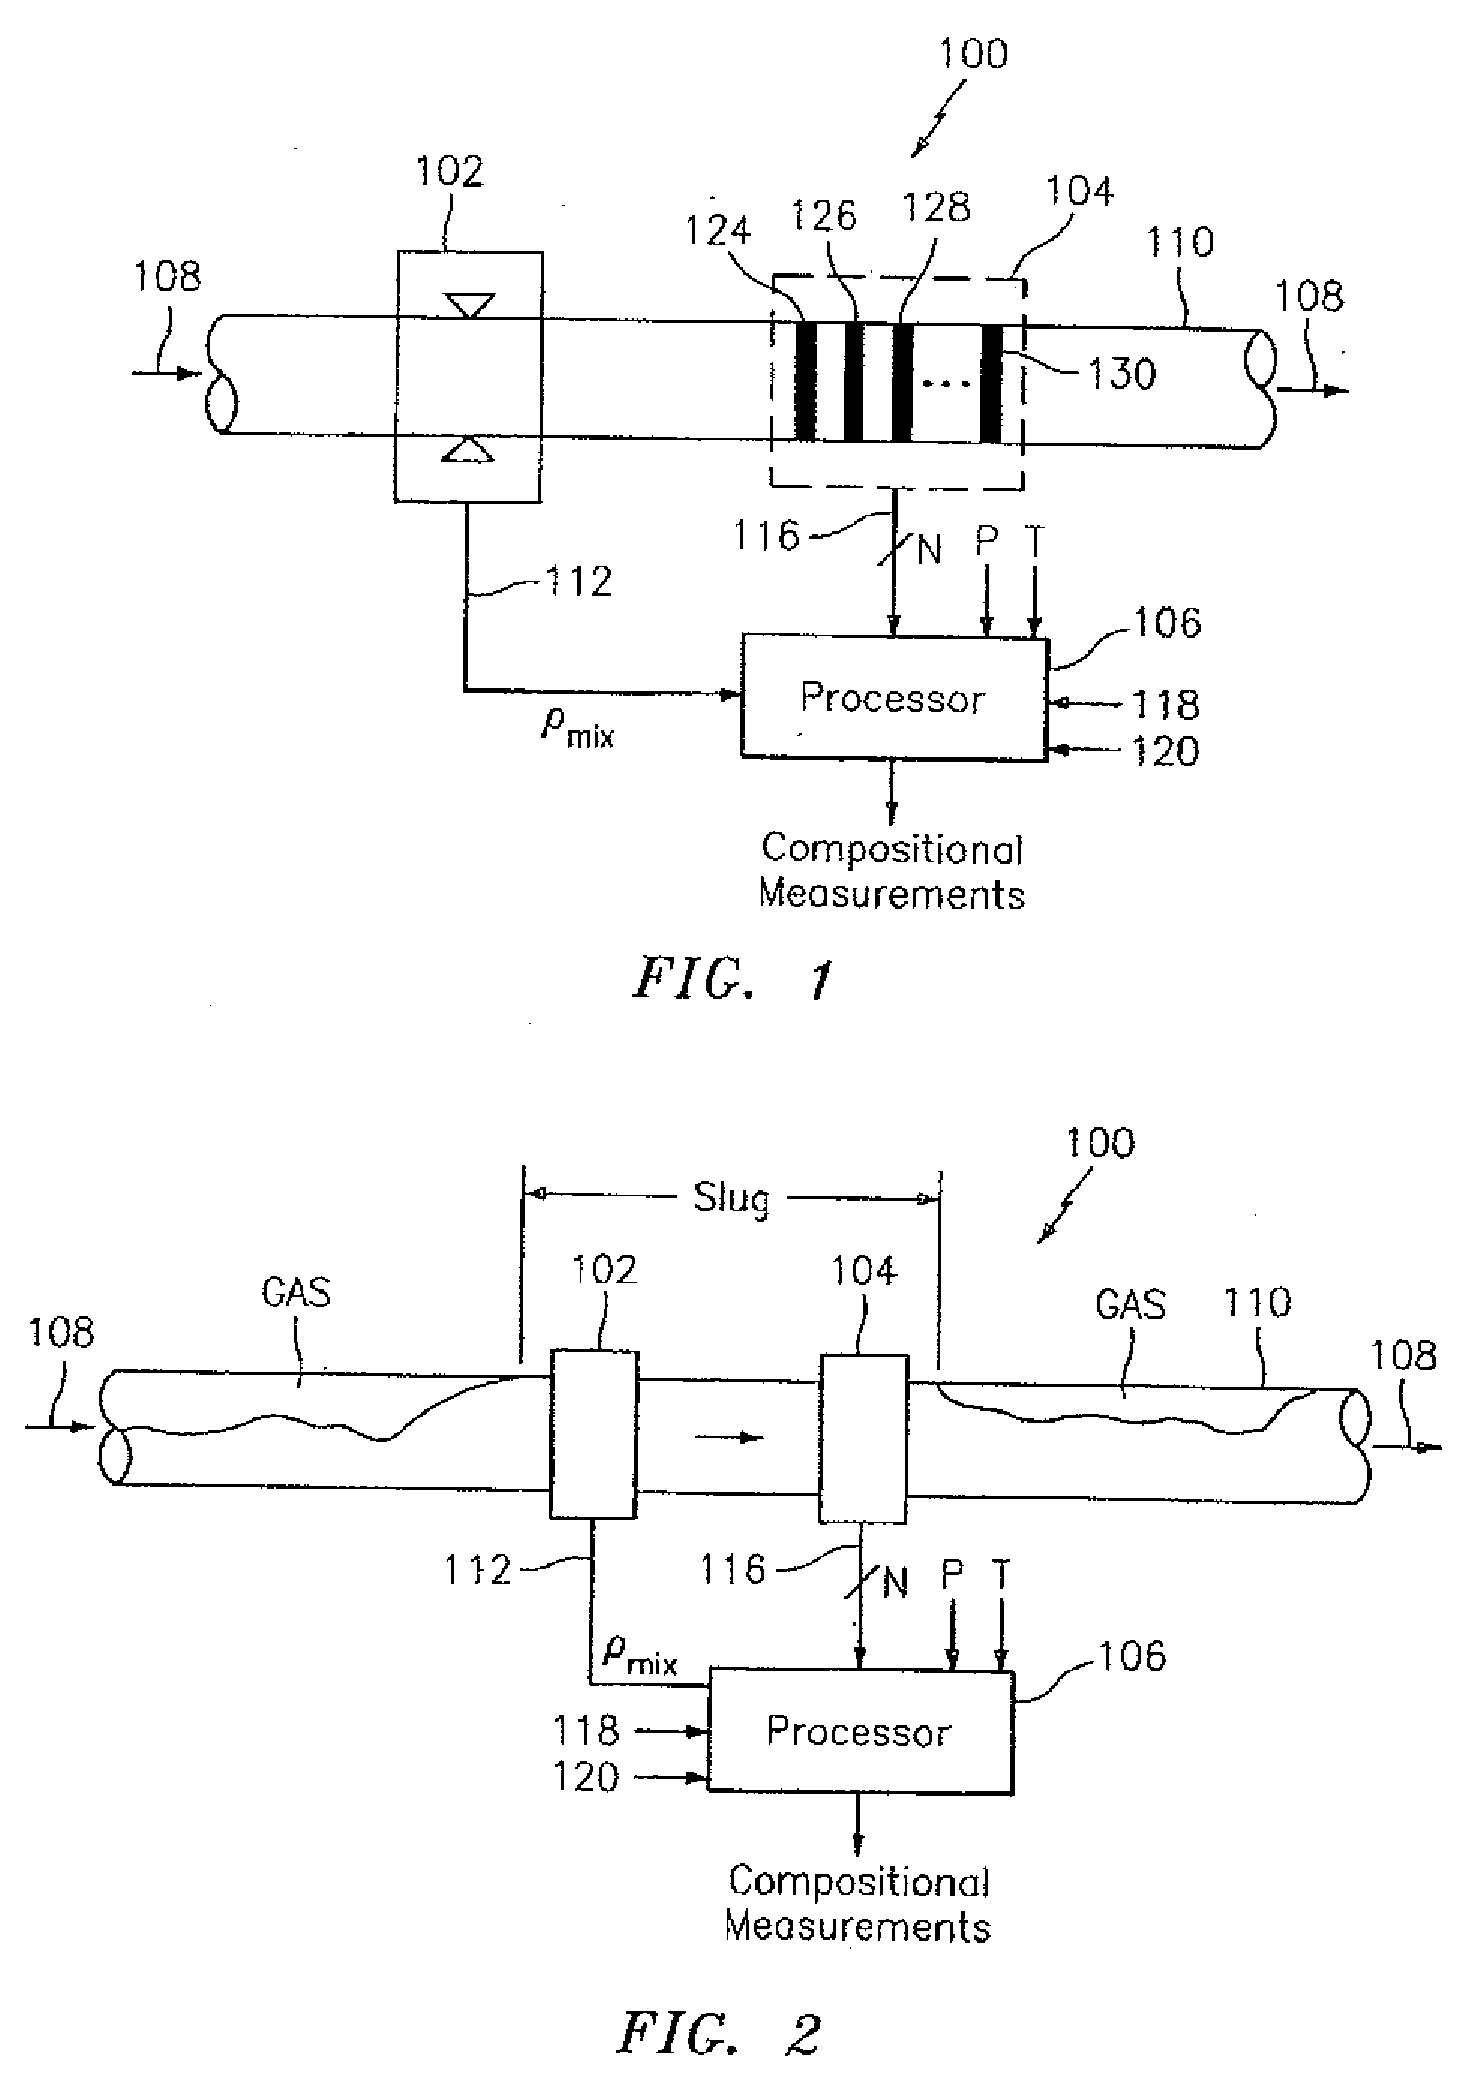 System and Method for Providing a Compositional Measurement of a Mixture Having Entrained Gas